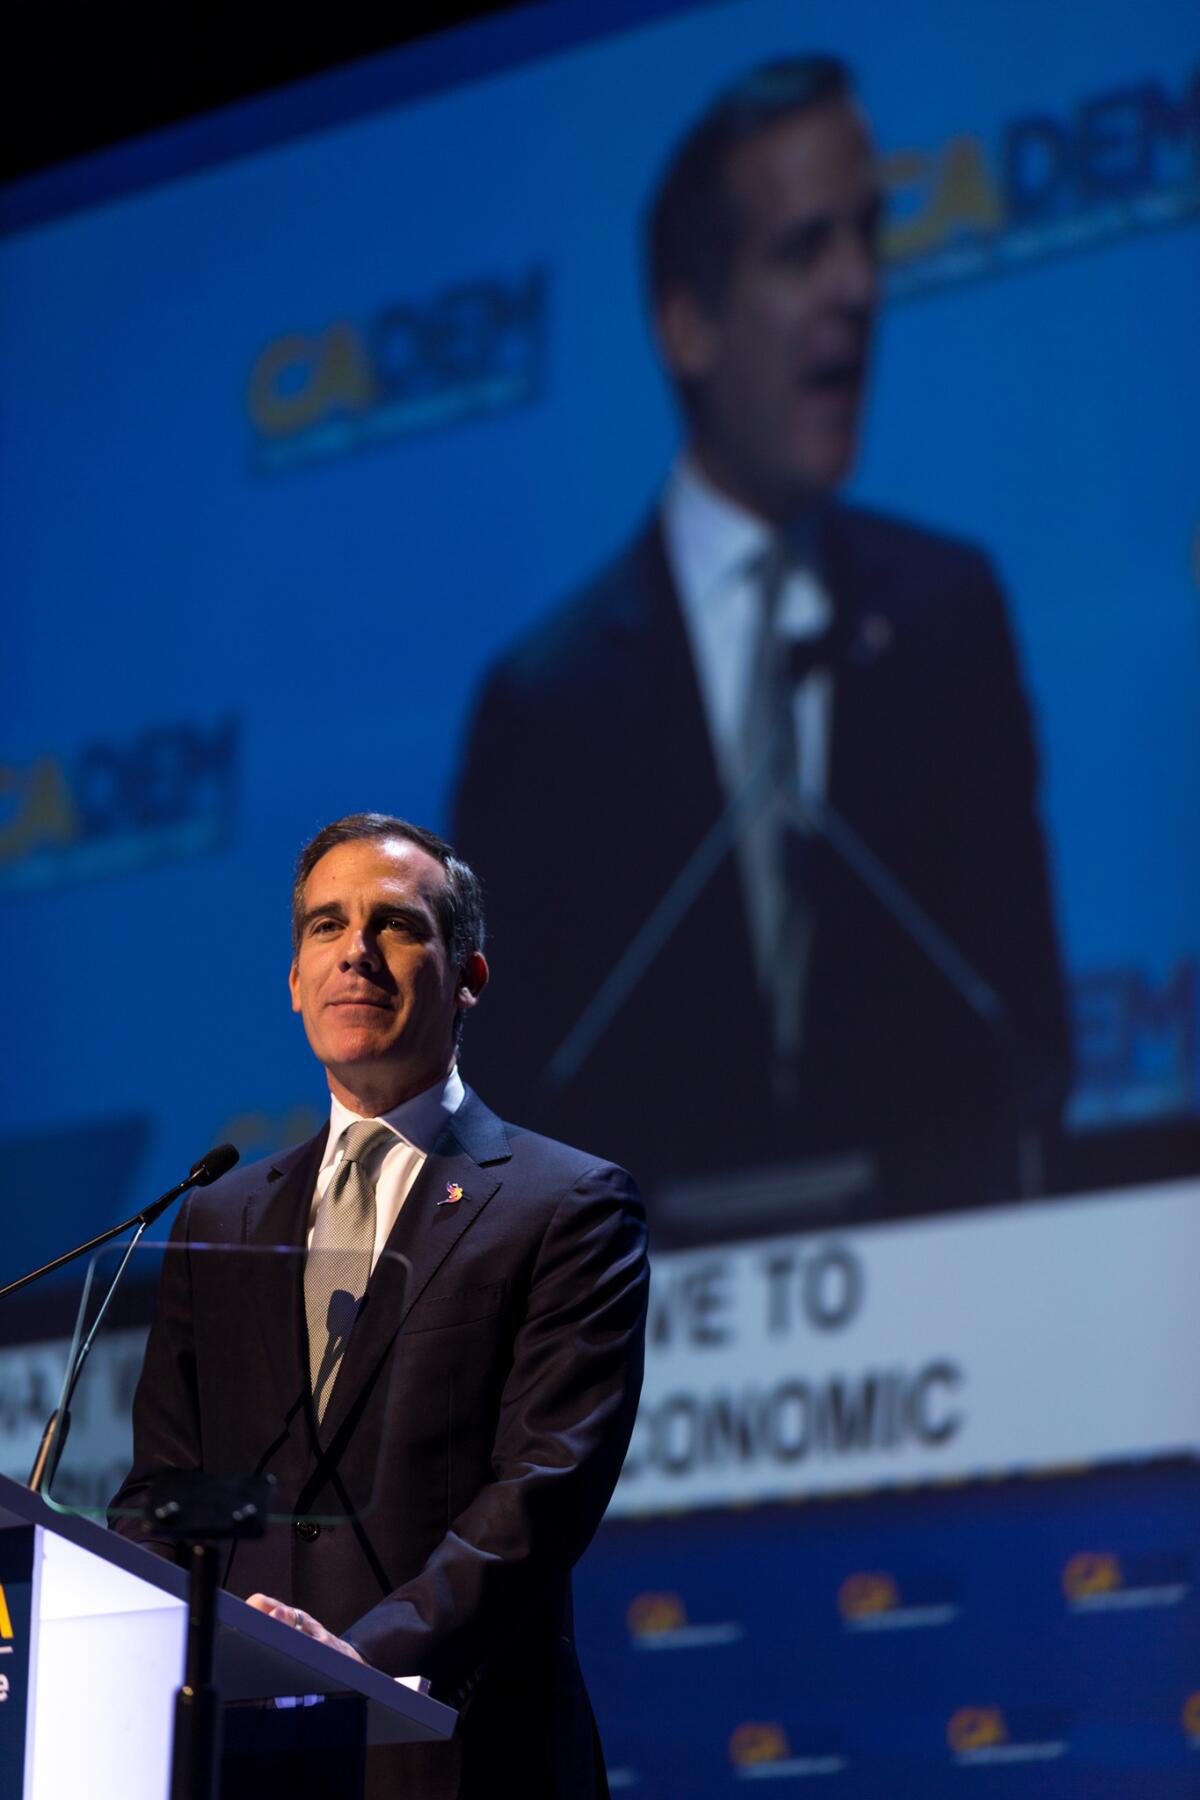 Los Angeles Mayor Eric Garcetti speaking at the California Democratic Party convention in San Diego Saturday.